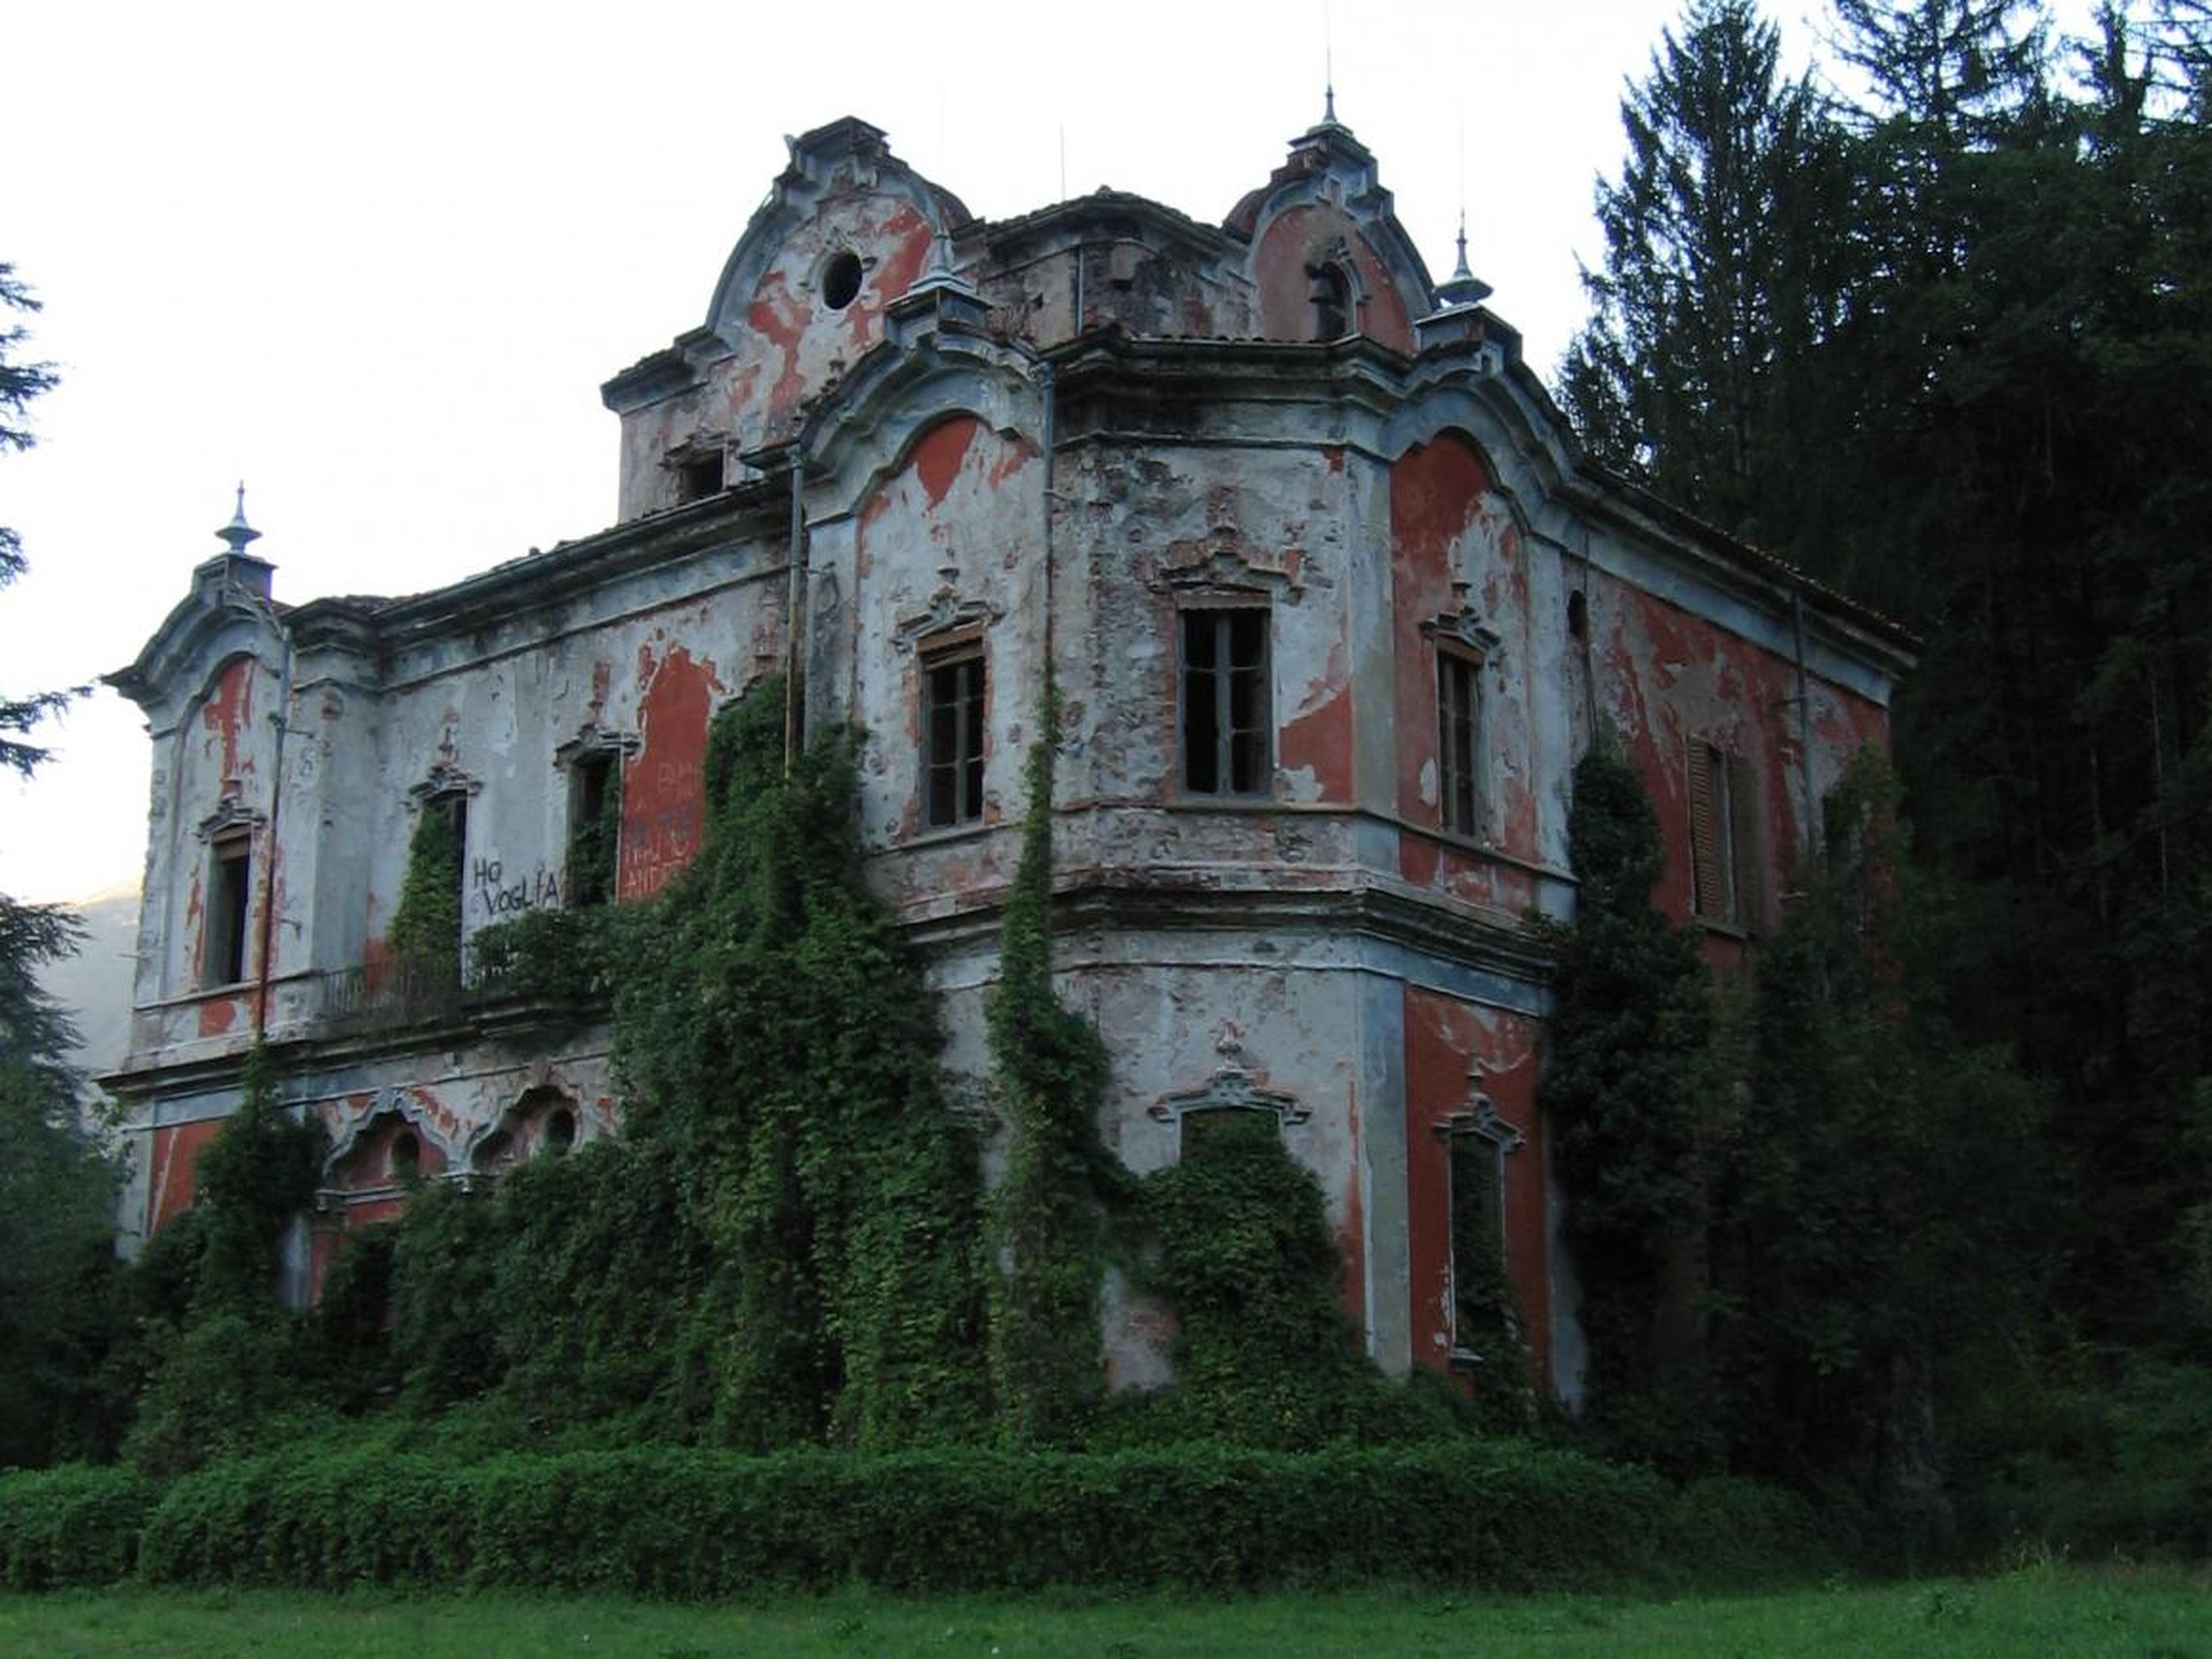 The Villa de Vecchi, known as the "Ghost Mansion" of Italy, was built between 1854 and 1857, meant to be the summer home of a Count named Felix De Vecchi, who was head of the Italian National Guard. The home had all the modern